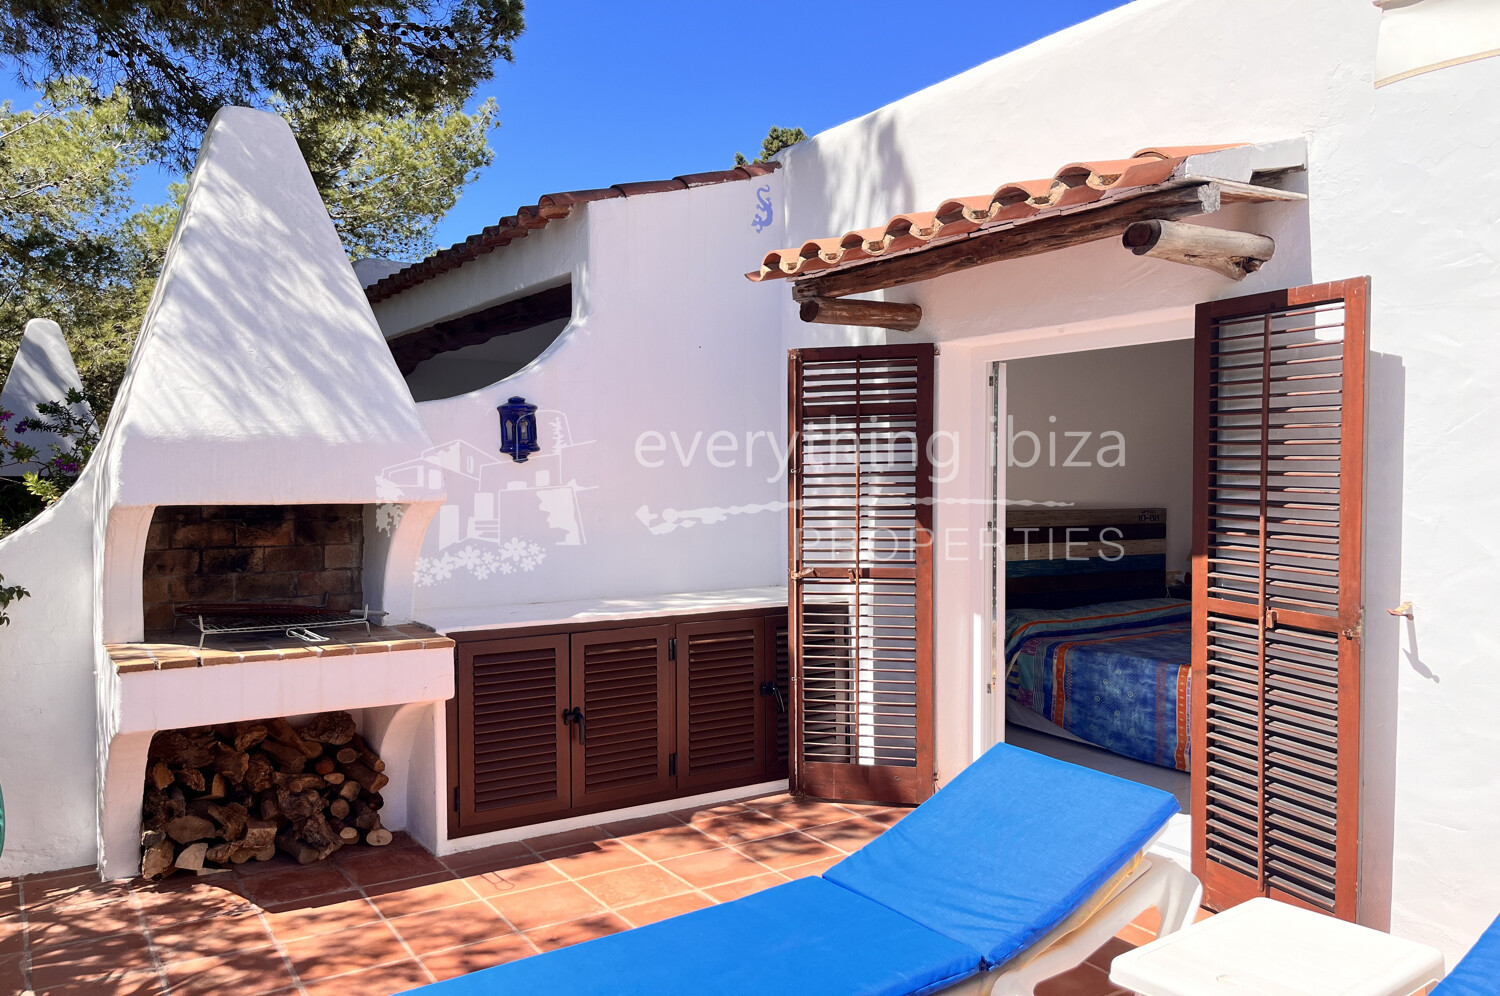 Charming Traditional Townhouse Close to Cala Conta with Sea and Sunset Views, ref. 1689, on sale in ibiza by everything ibiza Properties